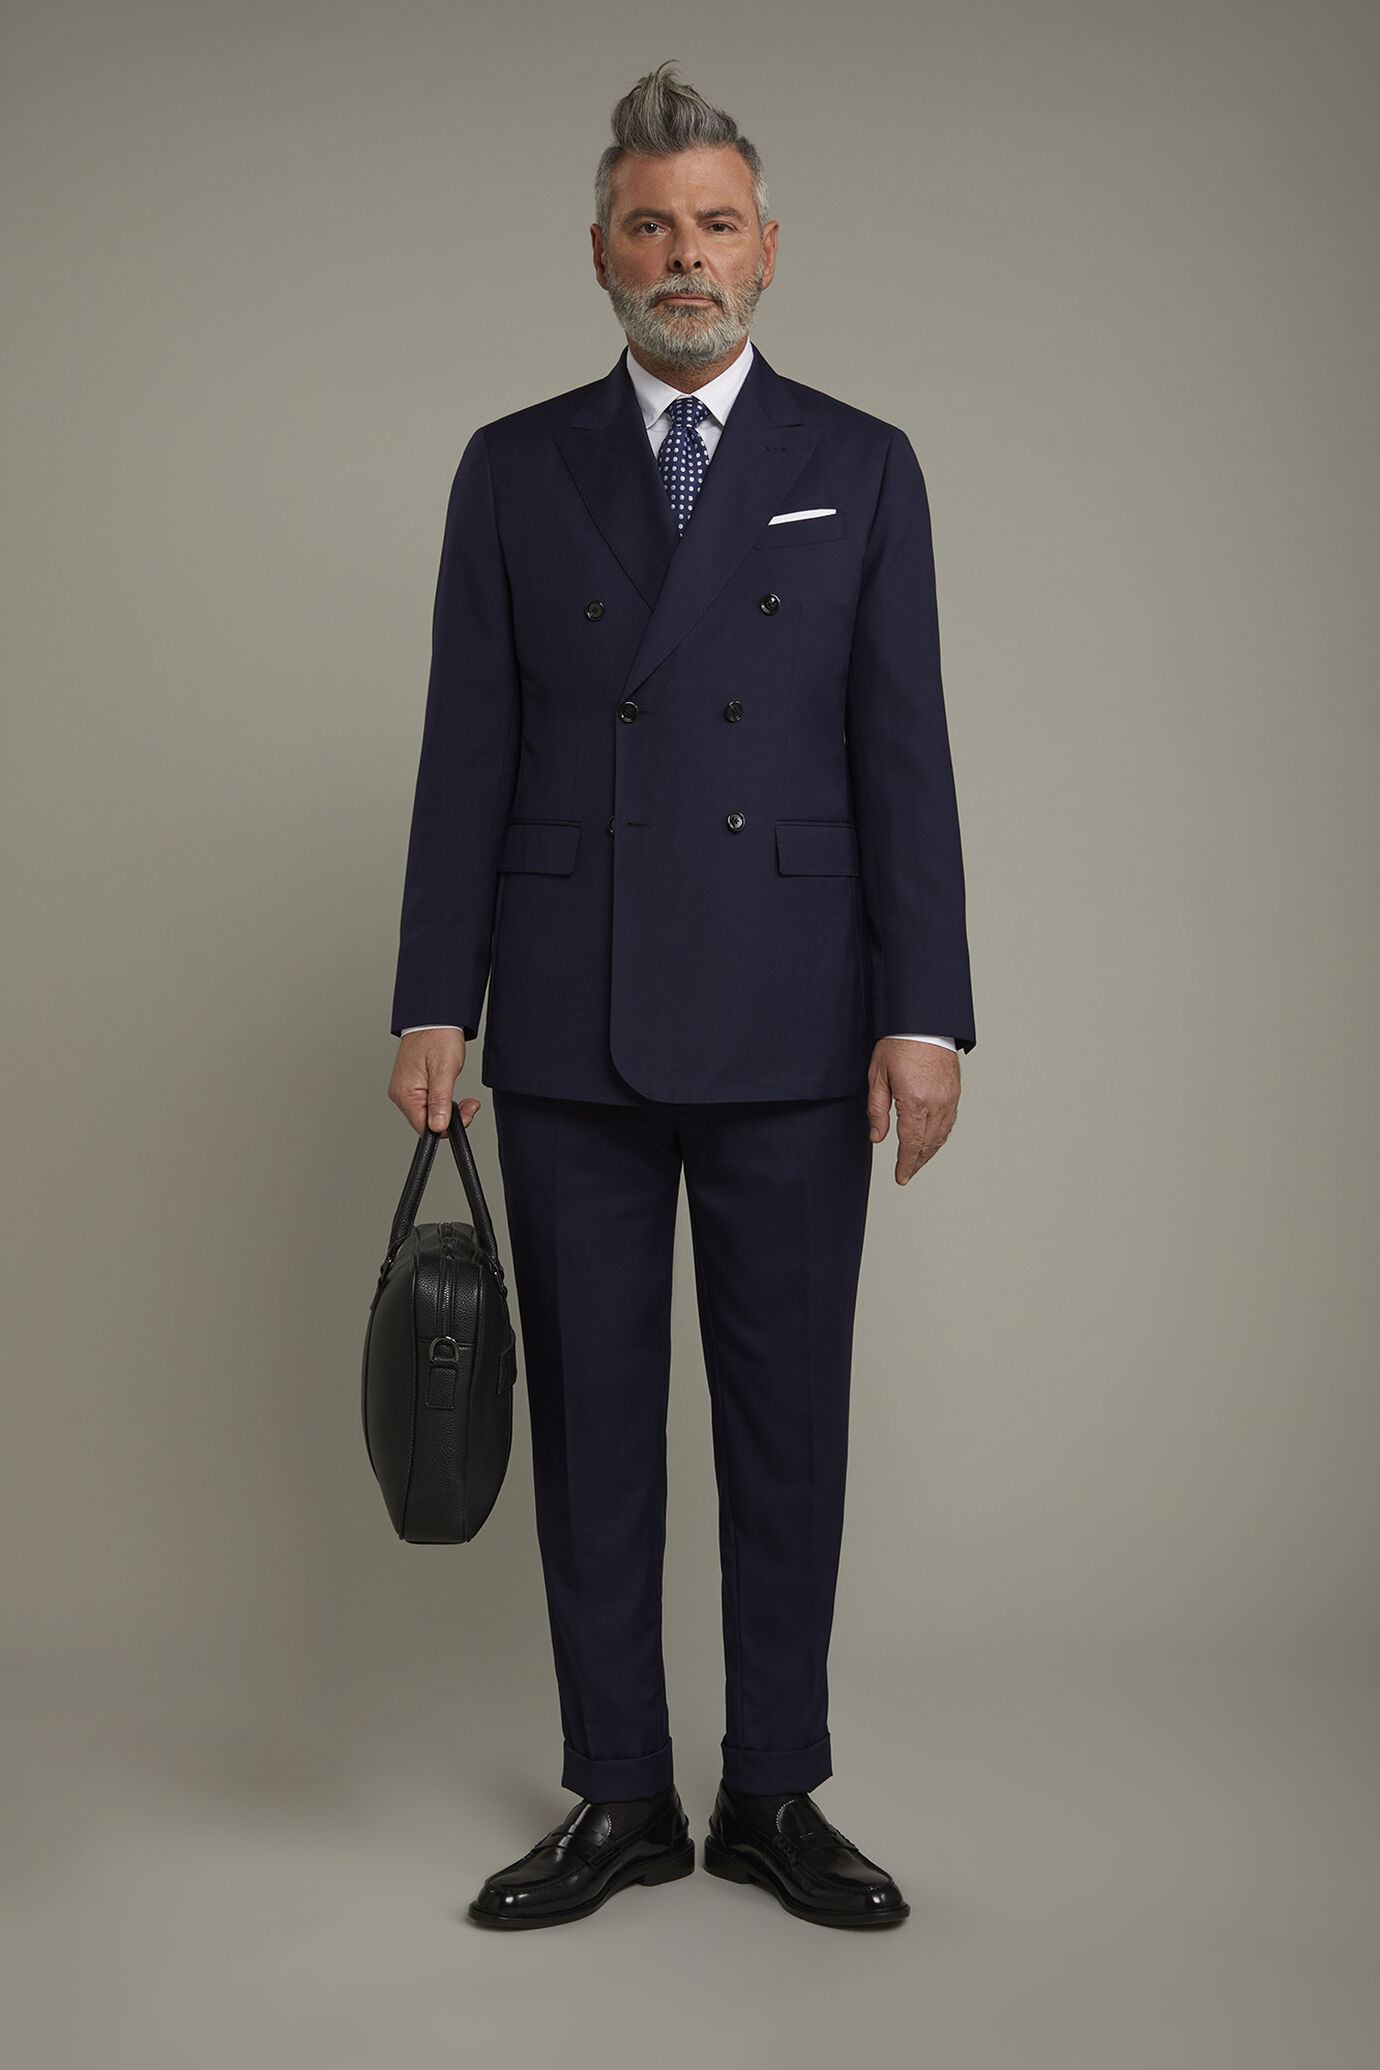 Men's double-breasted suit with classic single-breasted trousers and unlined double-breasted jacket with regular fit lance lapels